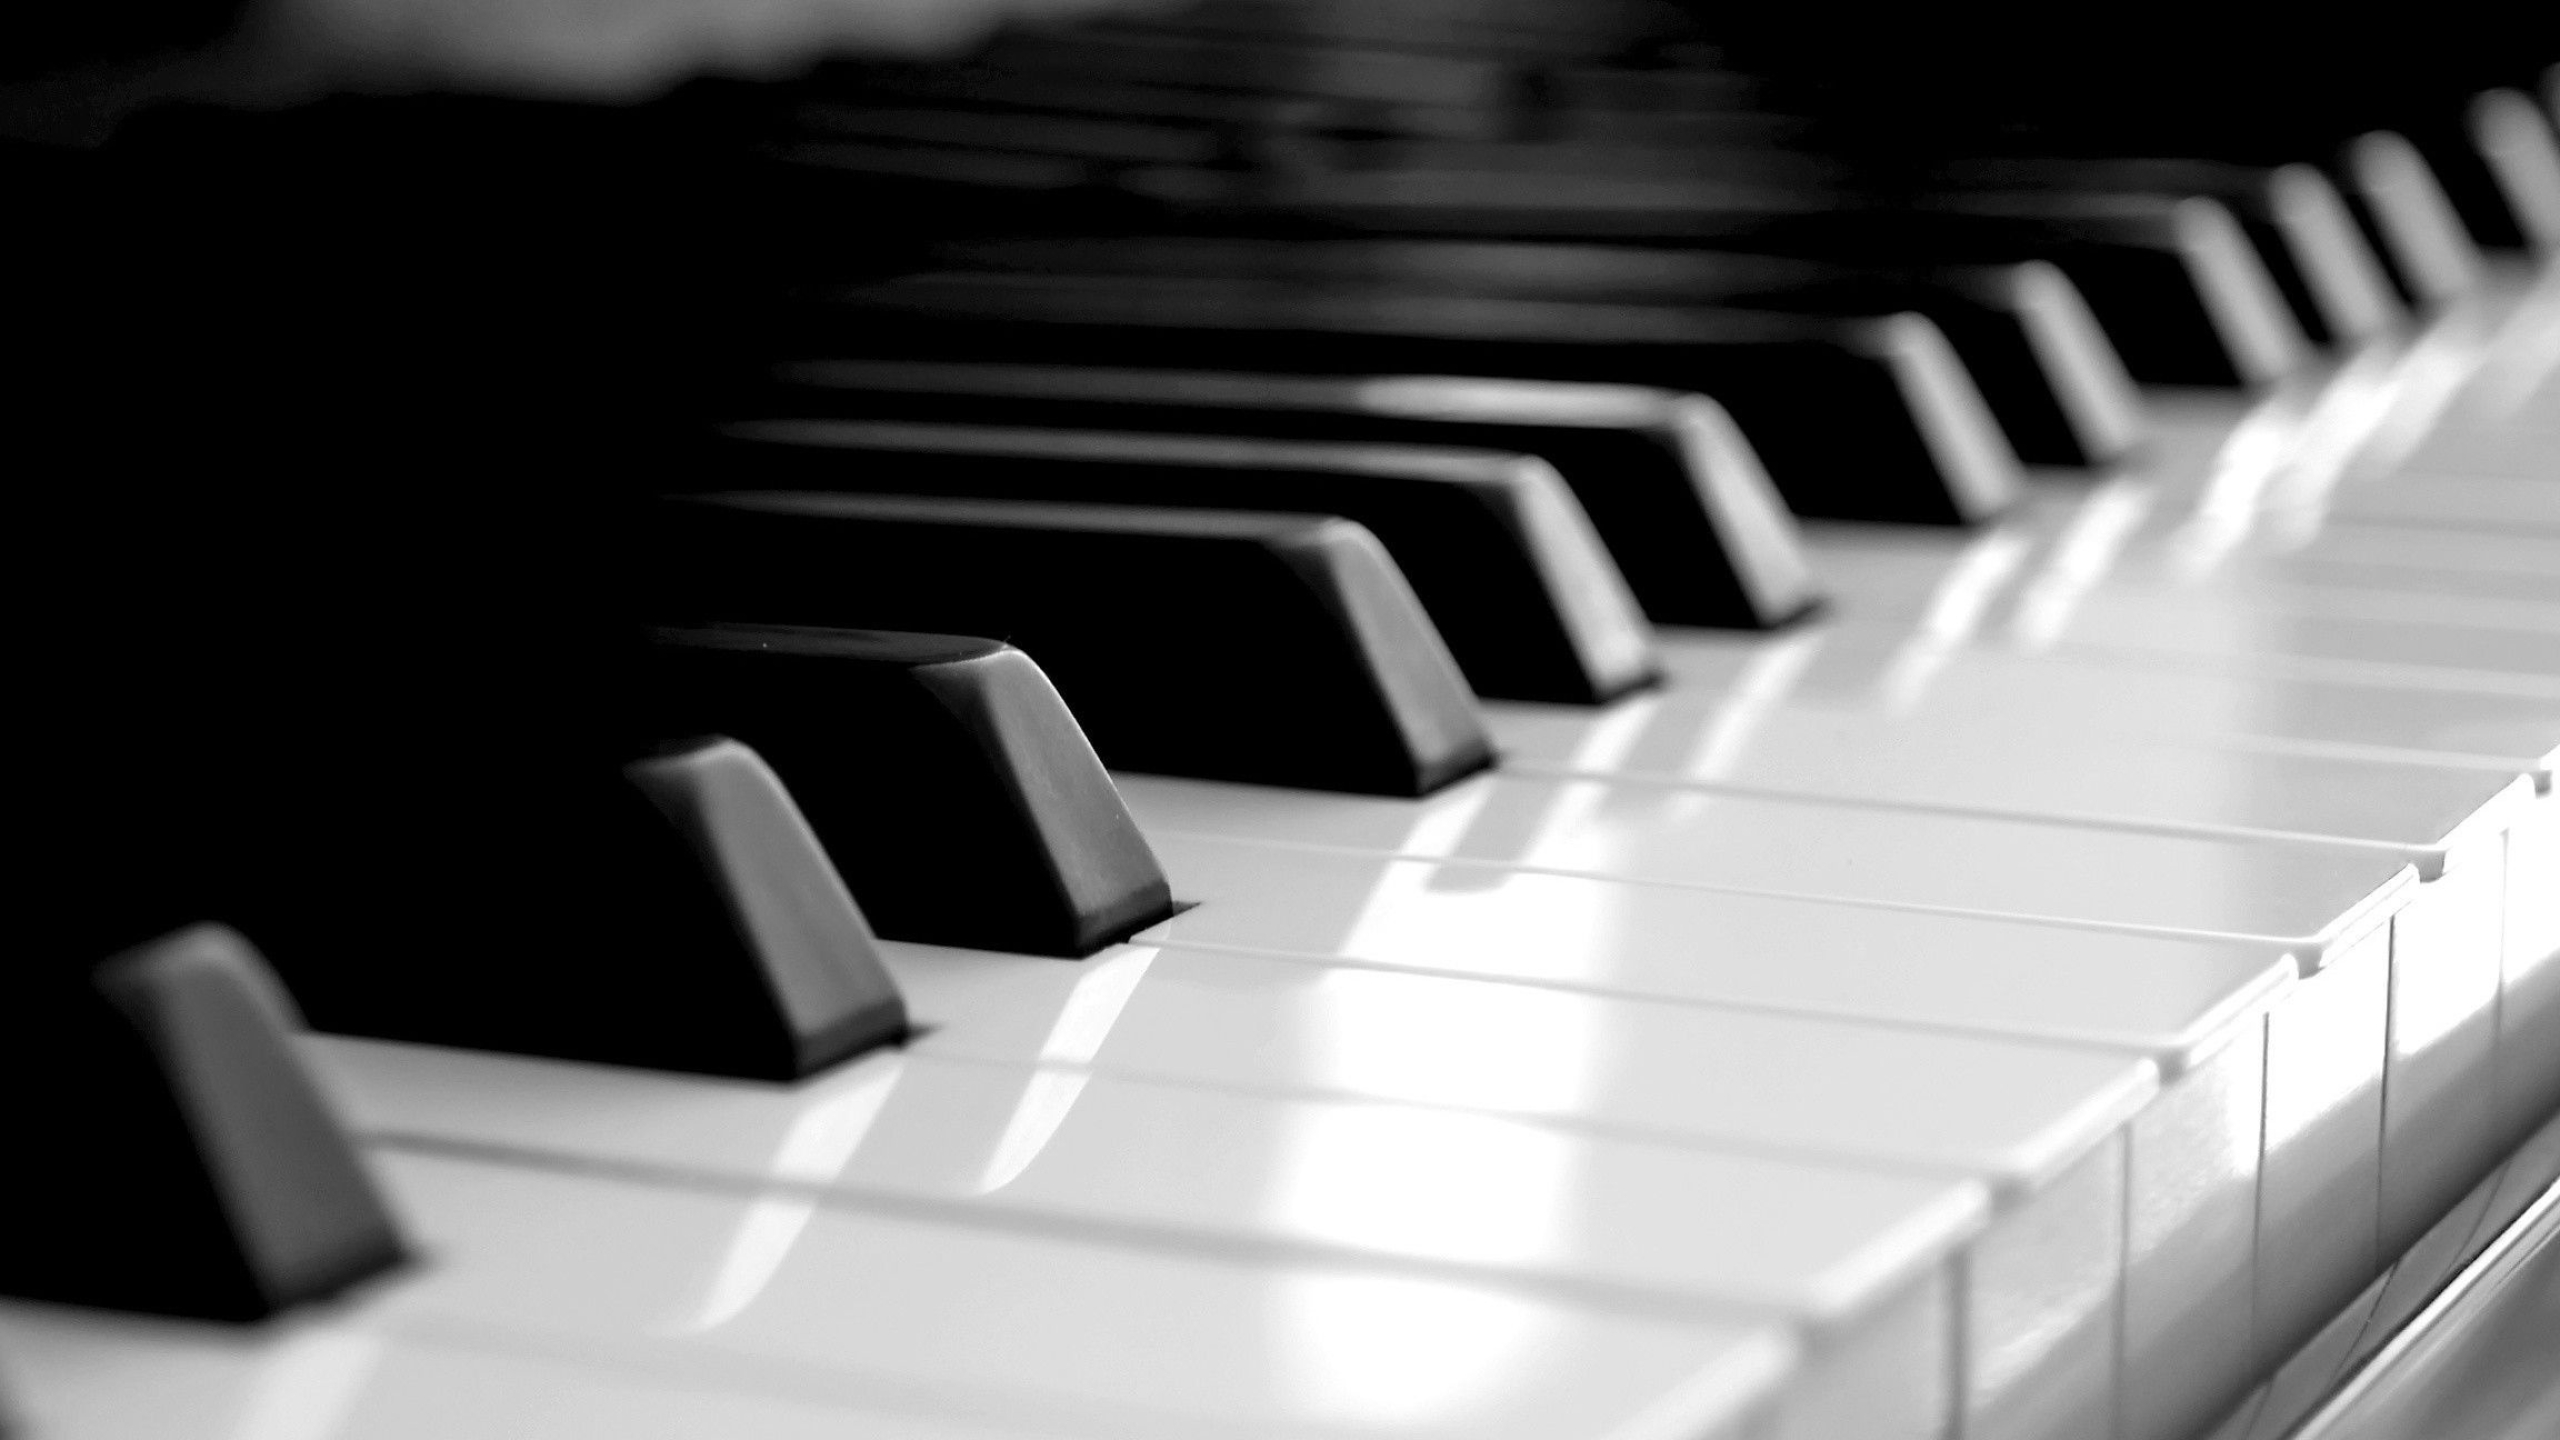 Fortepiano: Grand Piano, Black And White Keys, The Seven "Natural" Notes Of Each Octave, The Five Half-Tones. 2560x1440 HD Wallpaper.